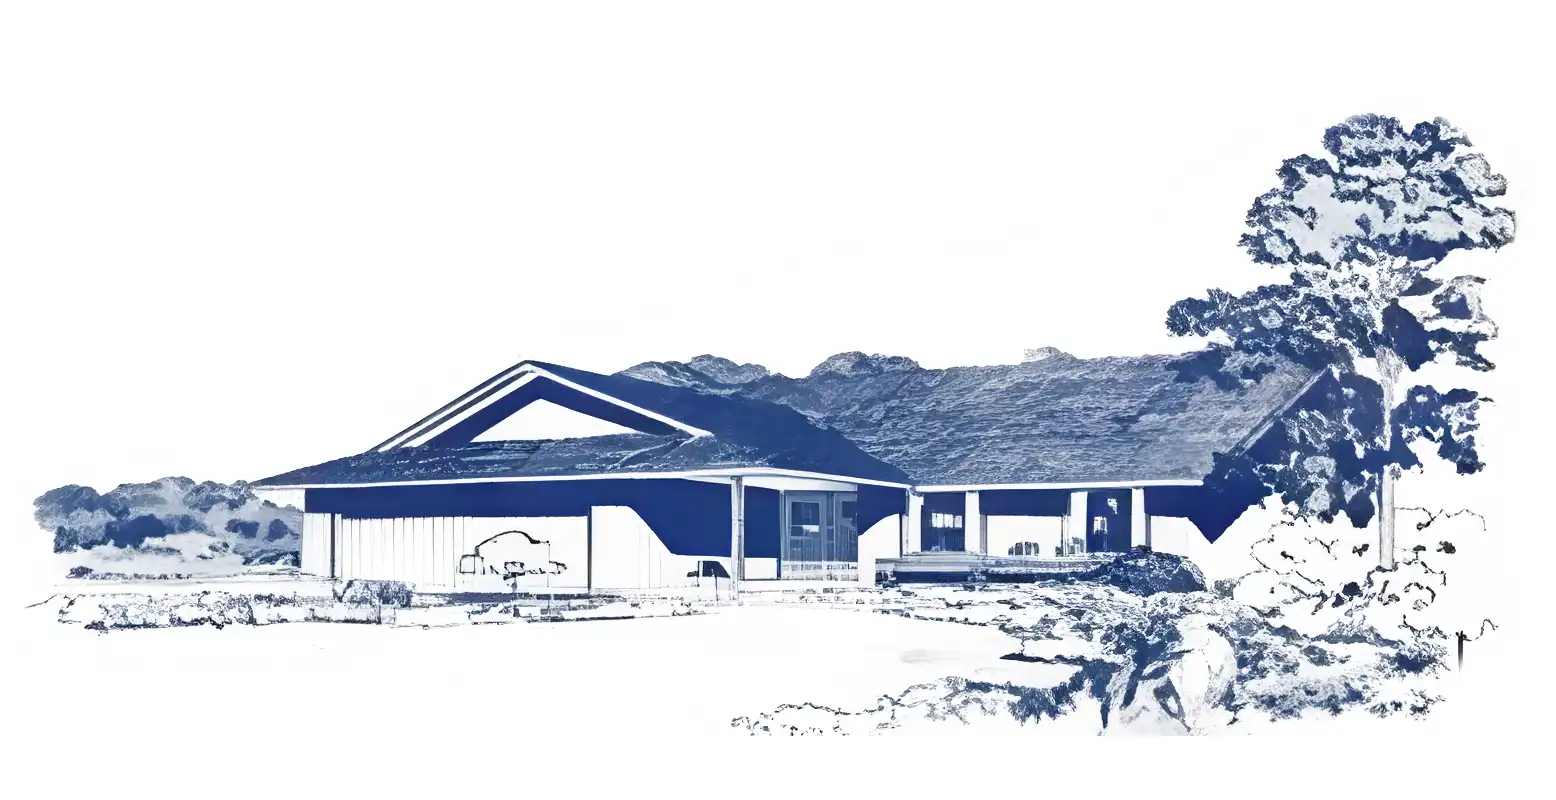 Monochrome rendering of 1960s ranch style house, variant combining gable roof with dutch gable over garage.